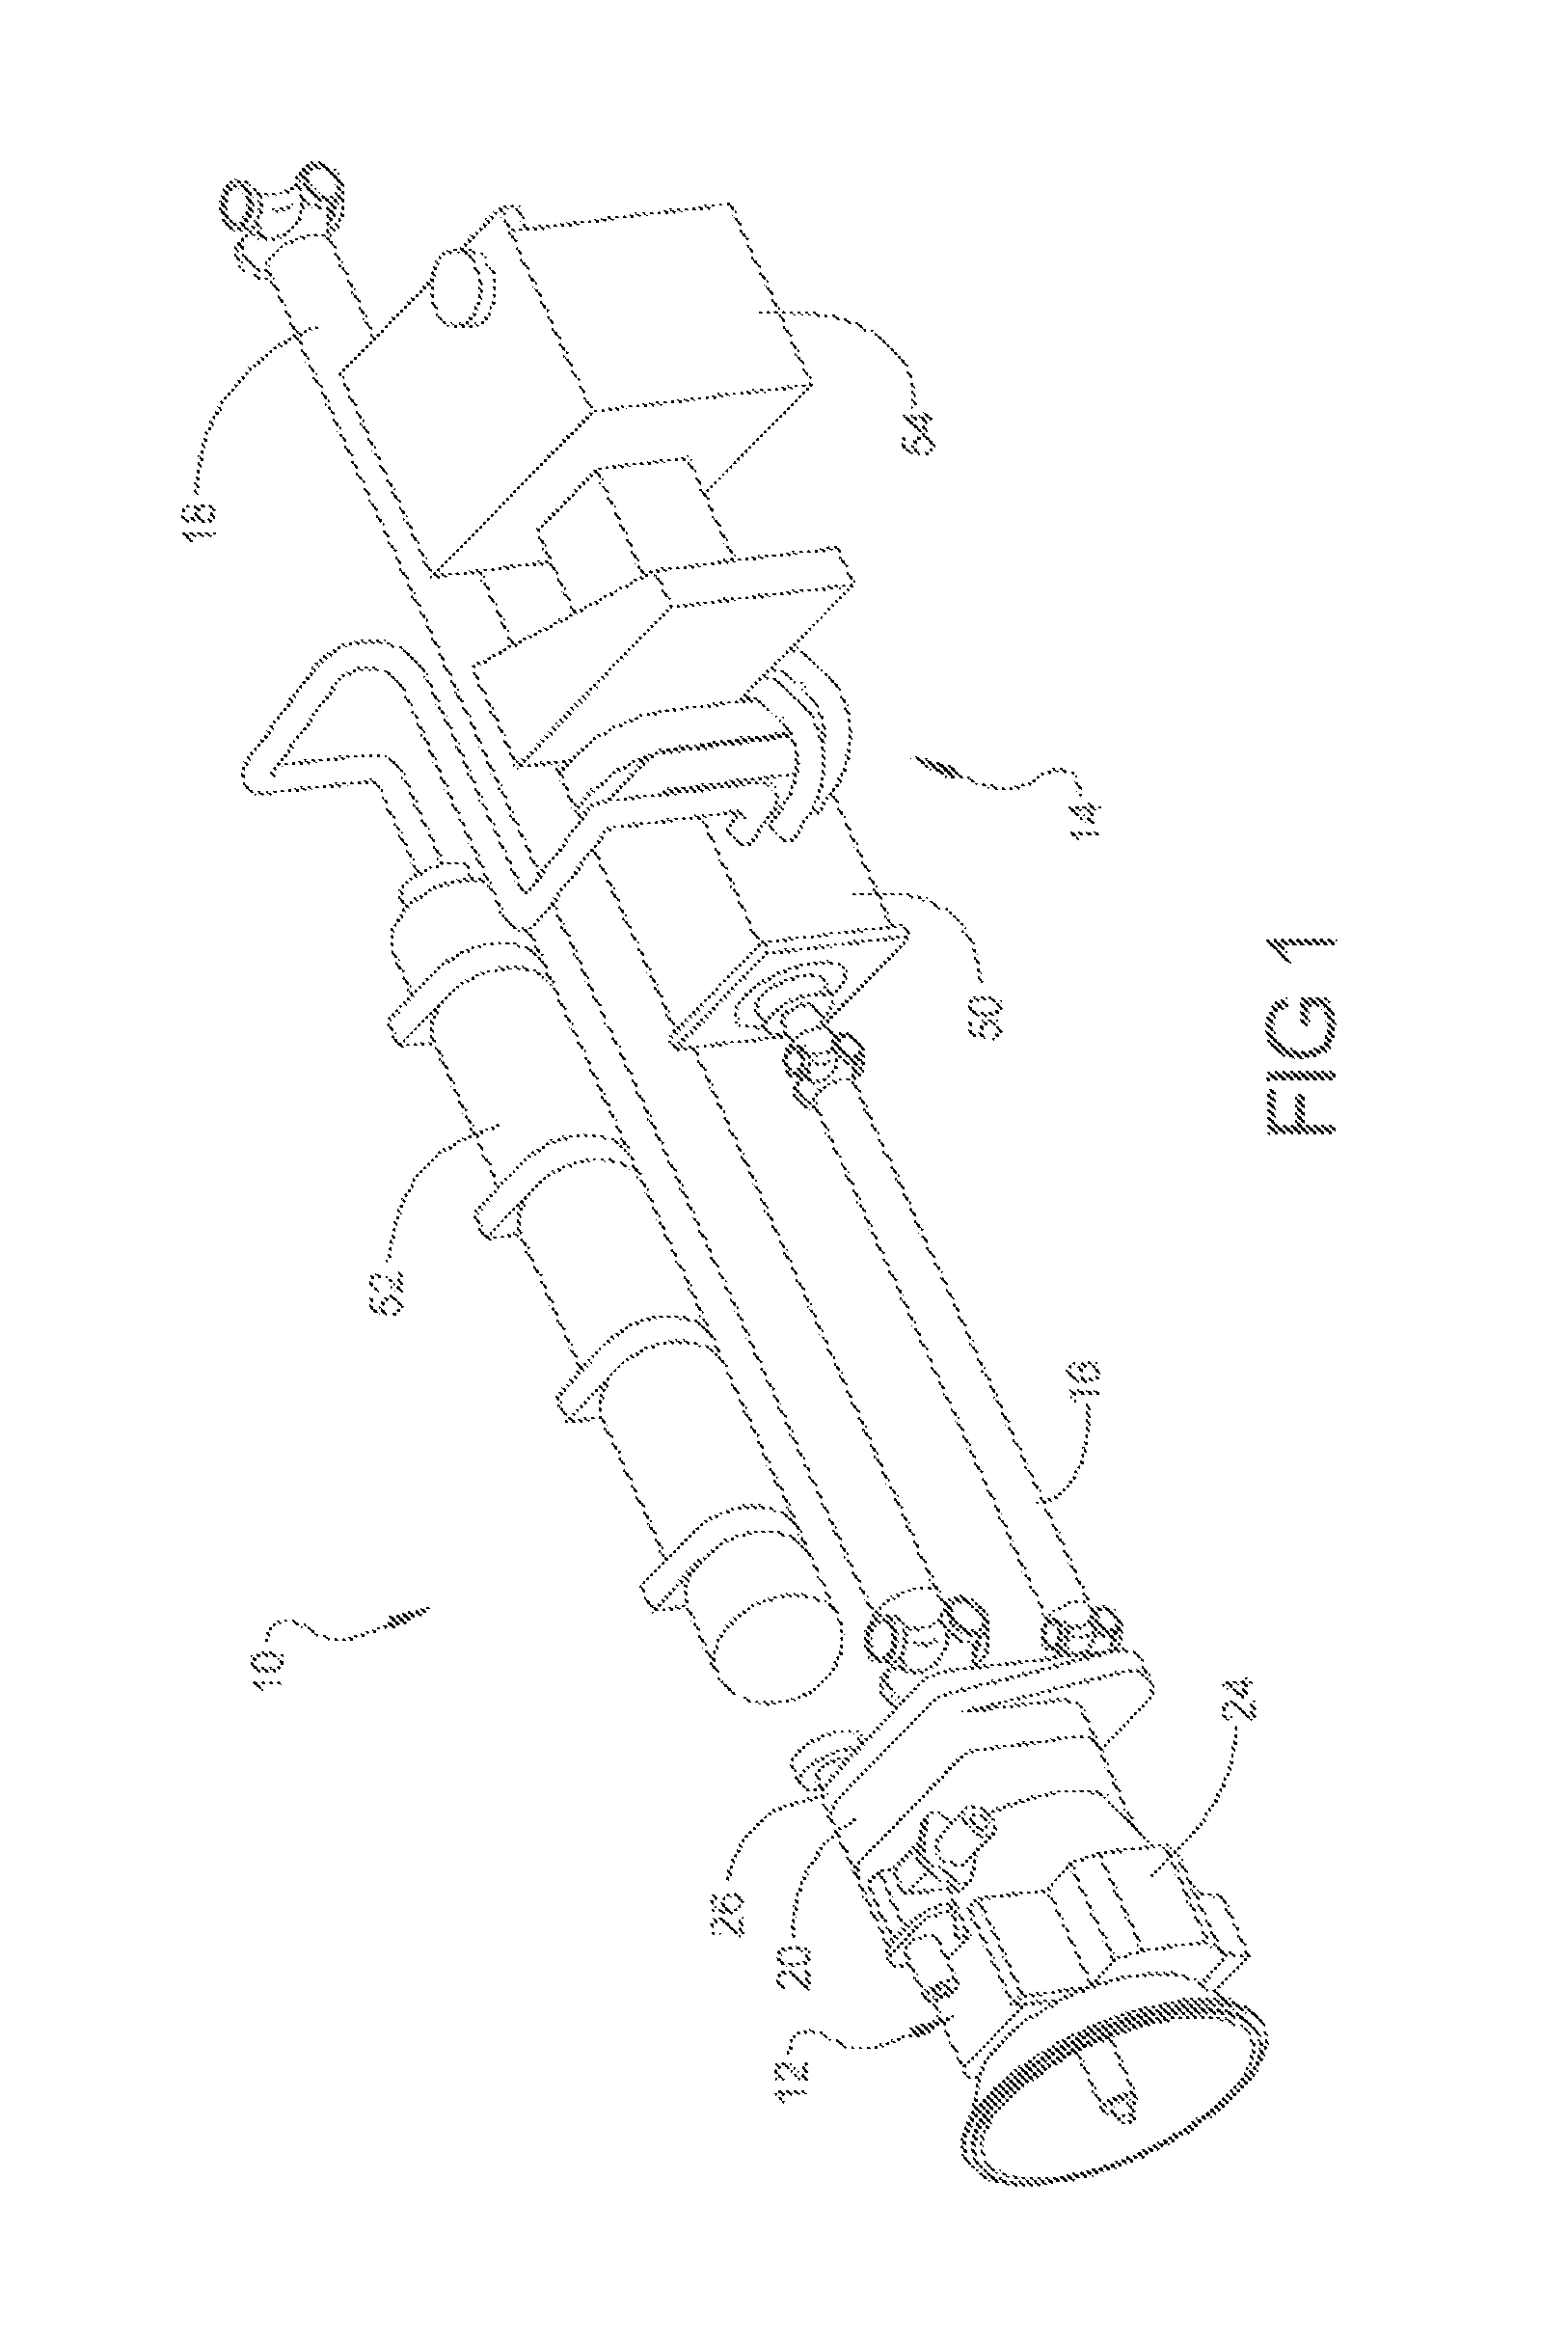 Adapter for connecting a countershaft transmission with a hydraulic launch assist system